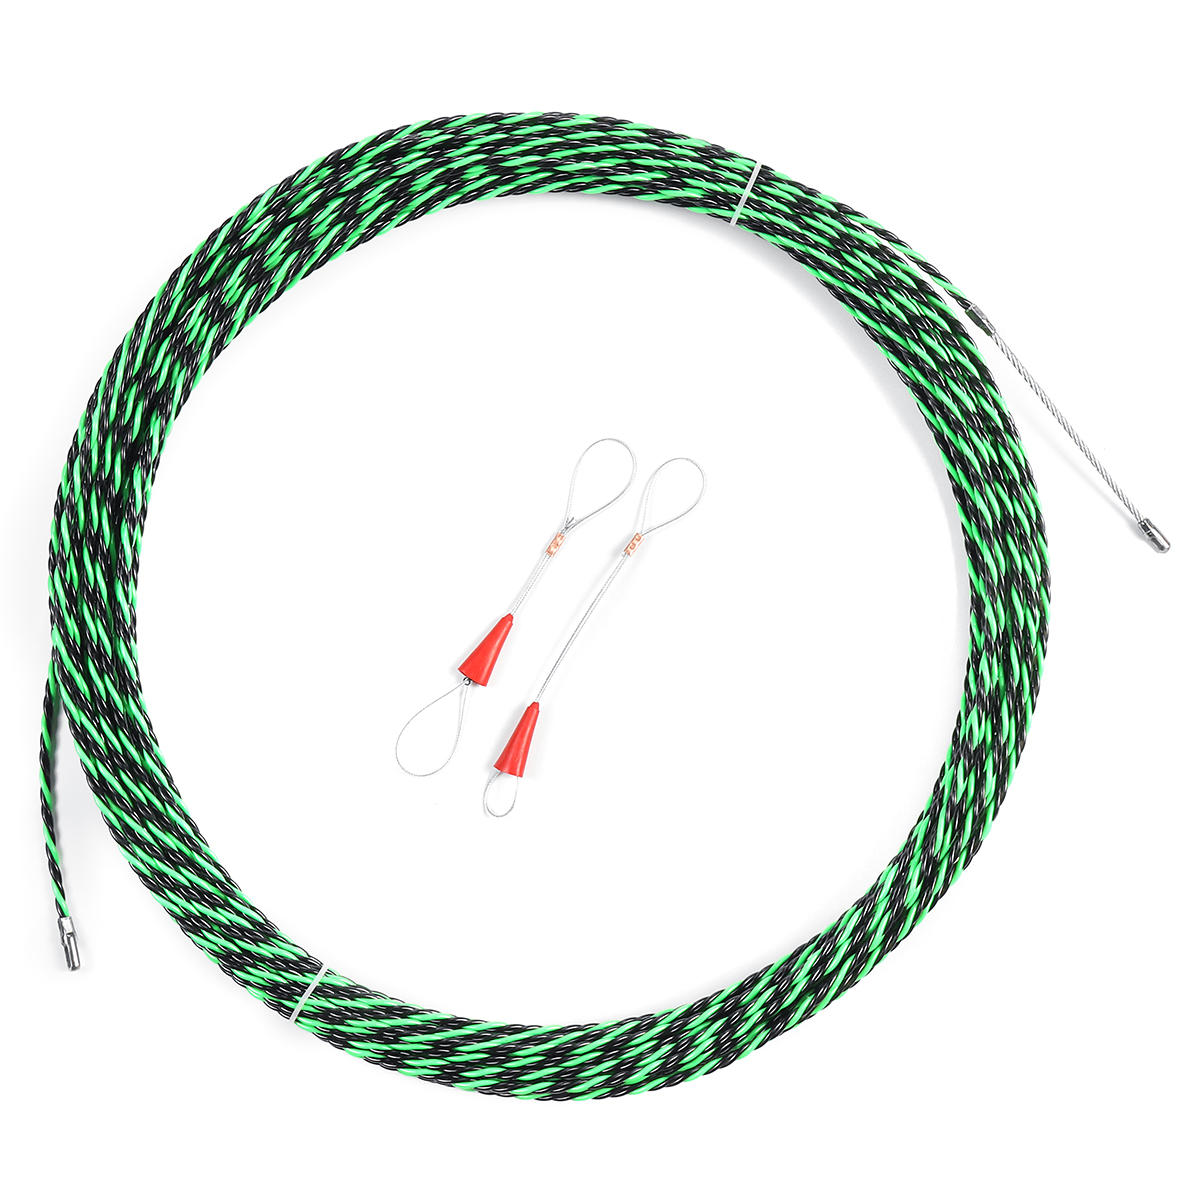 

5mm Flexible Fiberglass Cable Puller Handy Wire Electrical Tool Fish Tape 5m/10m/15m/20m/25m/30m/35m/40m